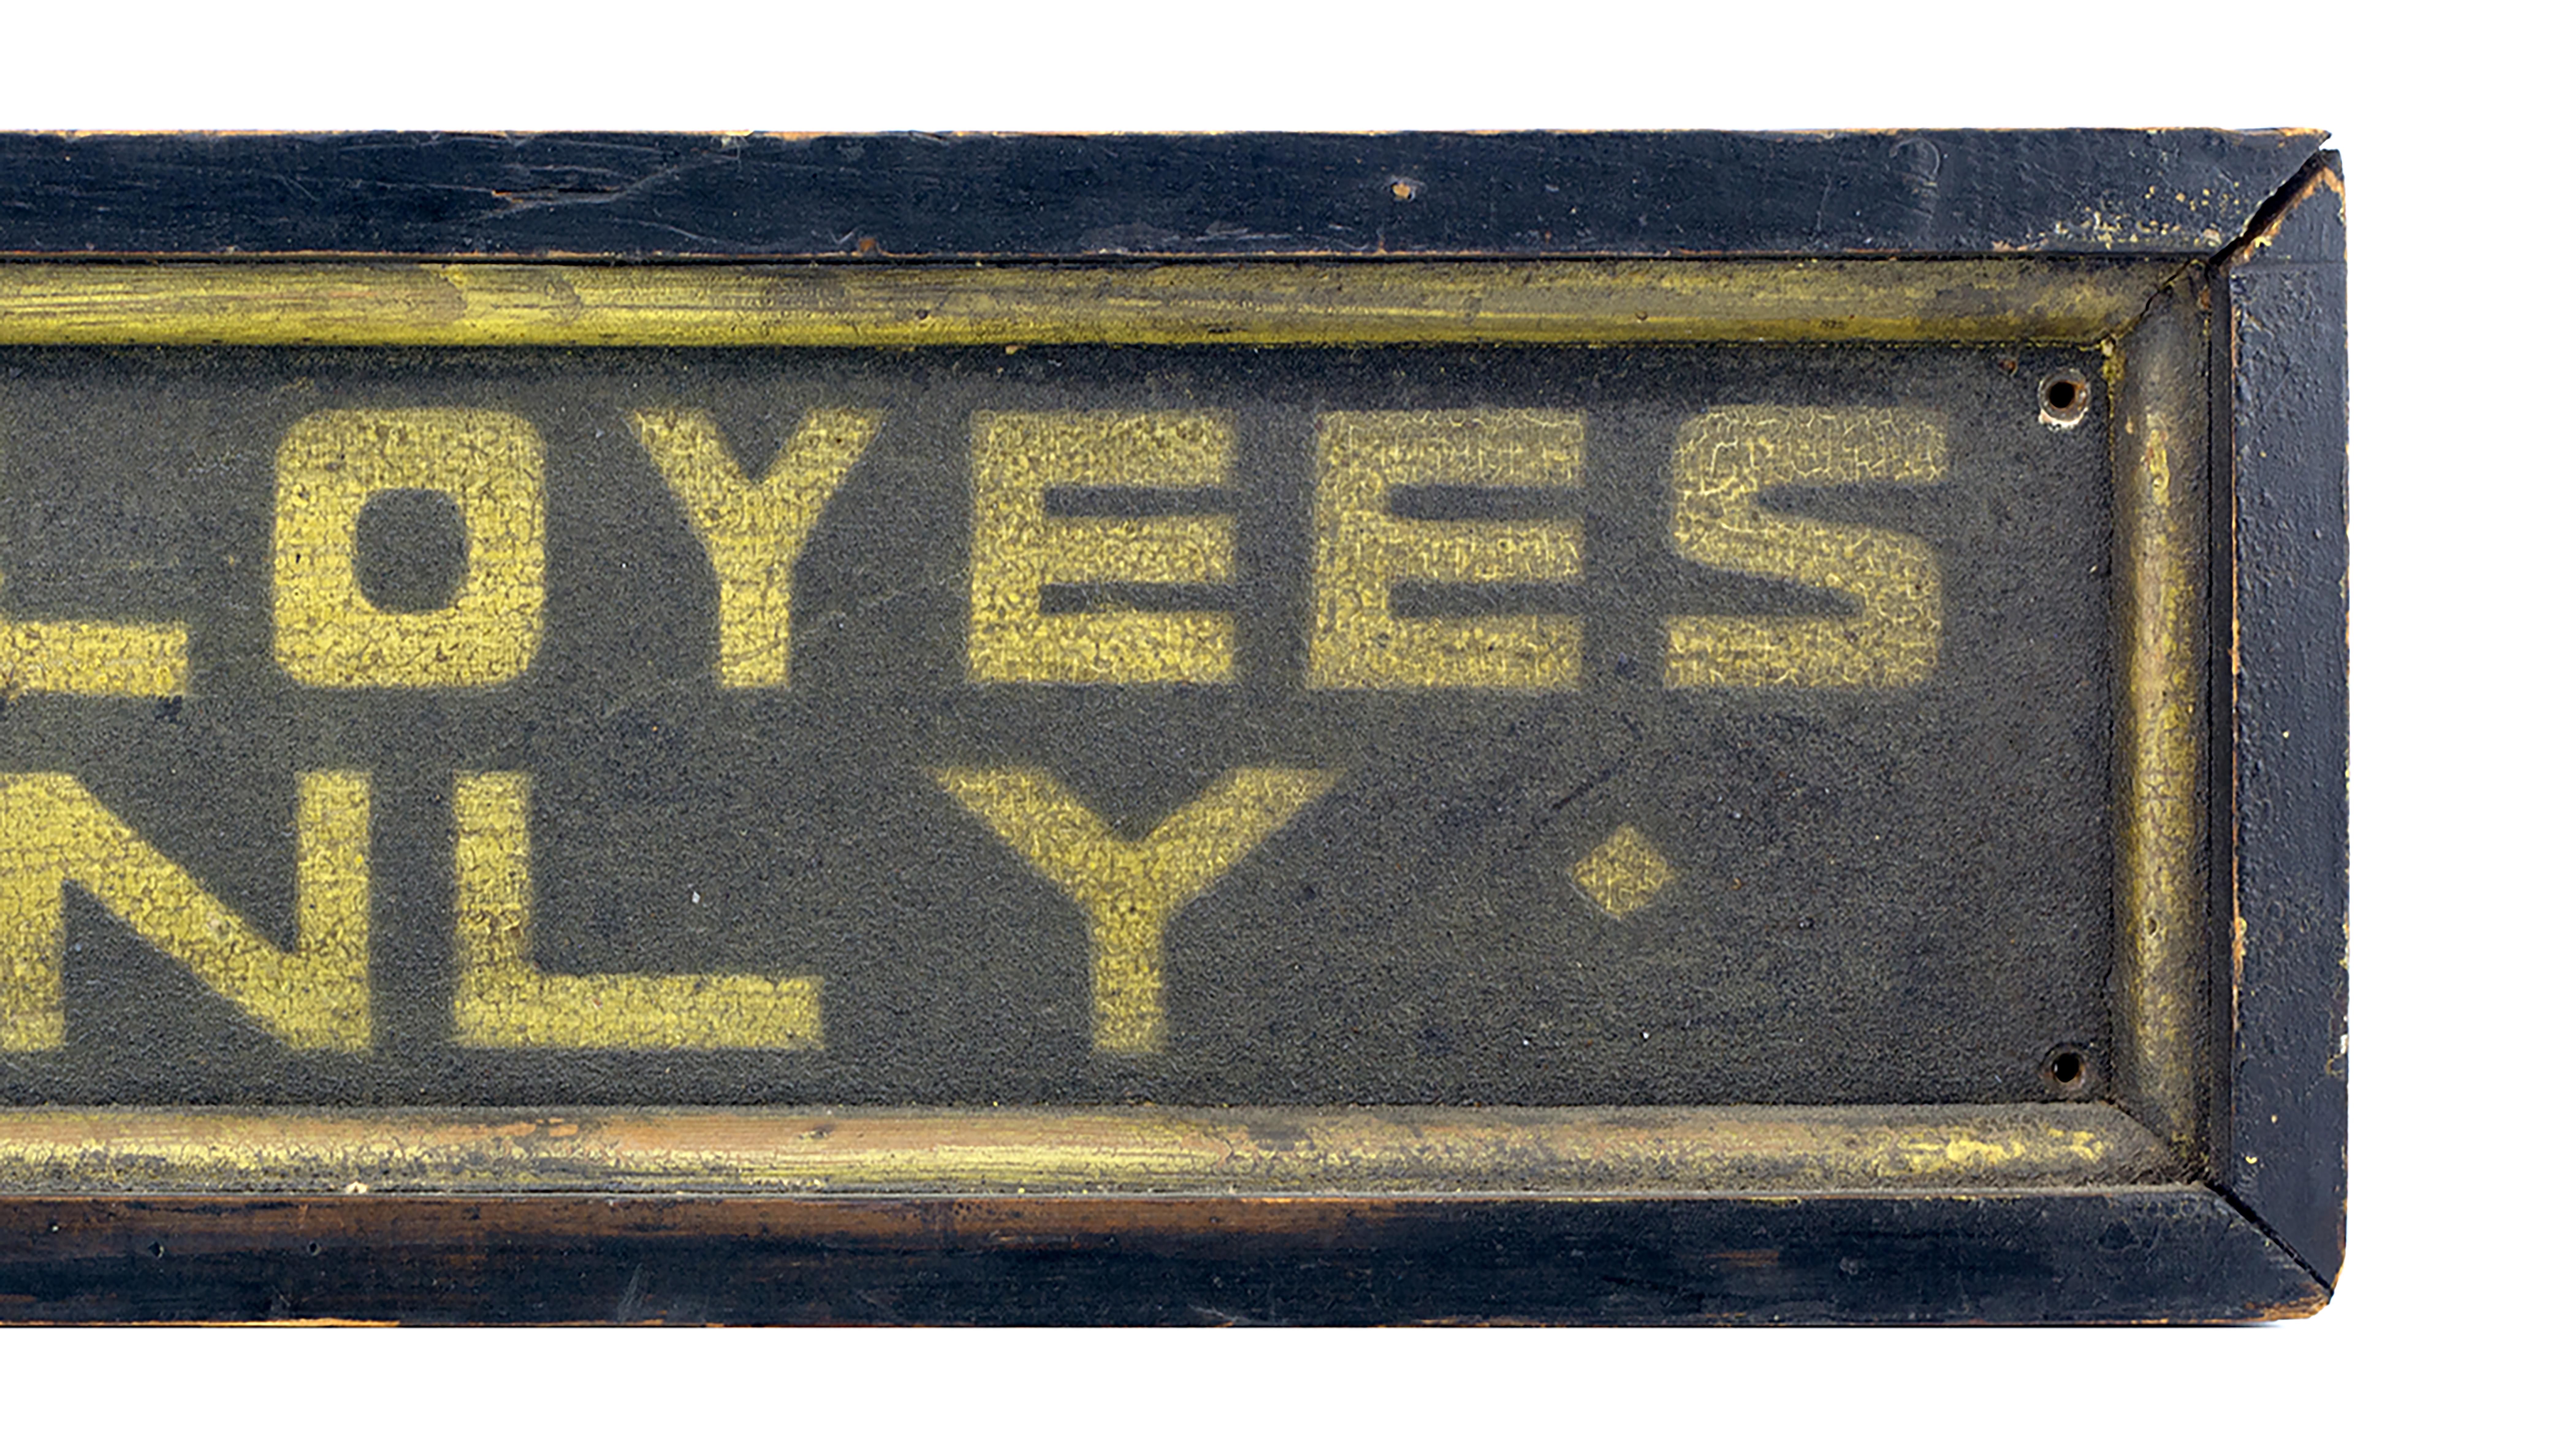 Great original painted surface with yellow block lettering on black ground.
With a yellow rounded fillet border, circa 1890.
Measures: 7.5” x 24.75” x 2.5